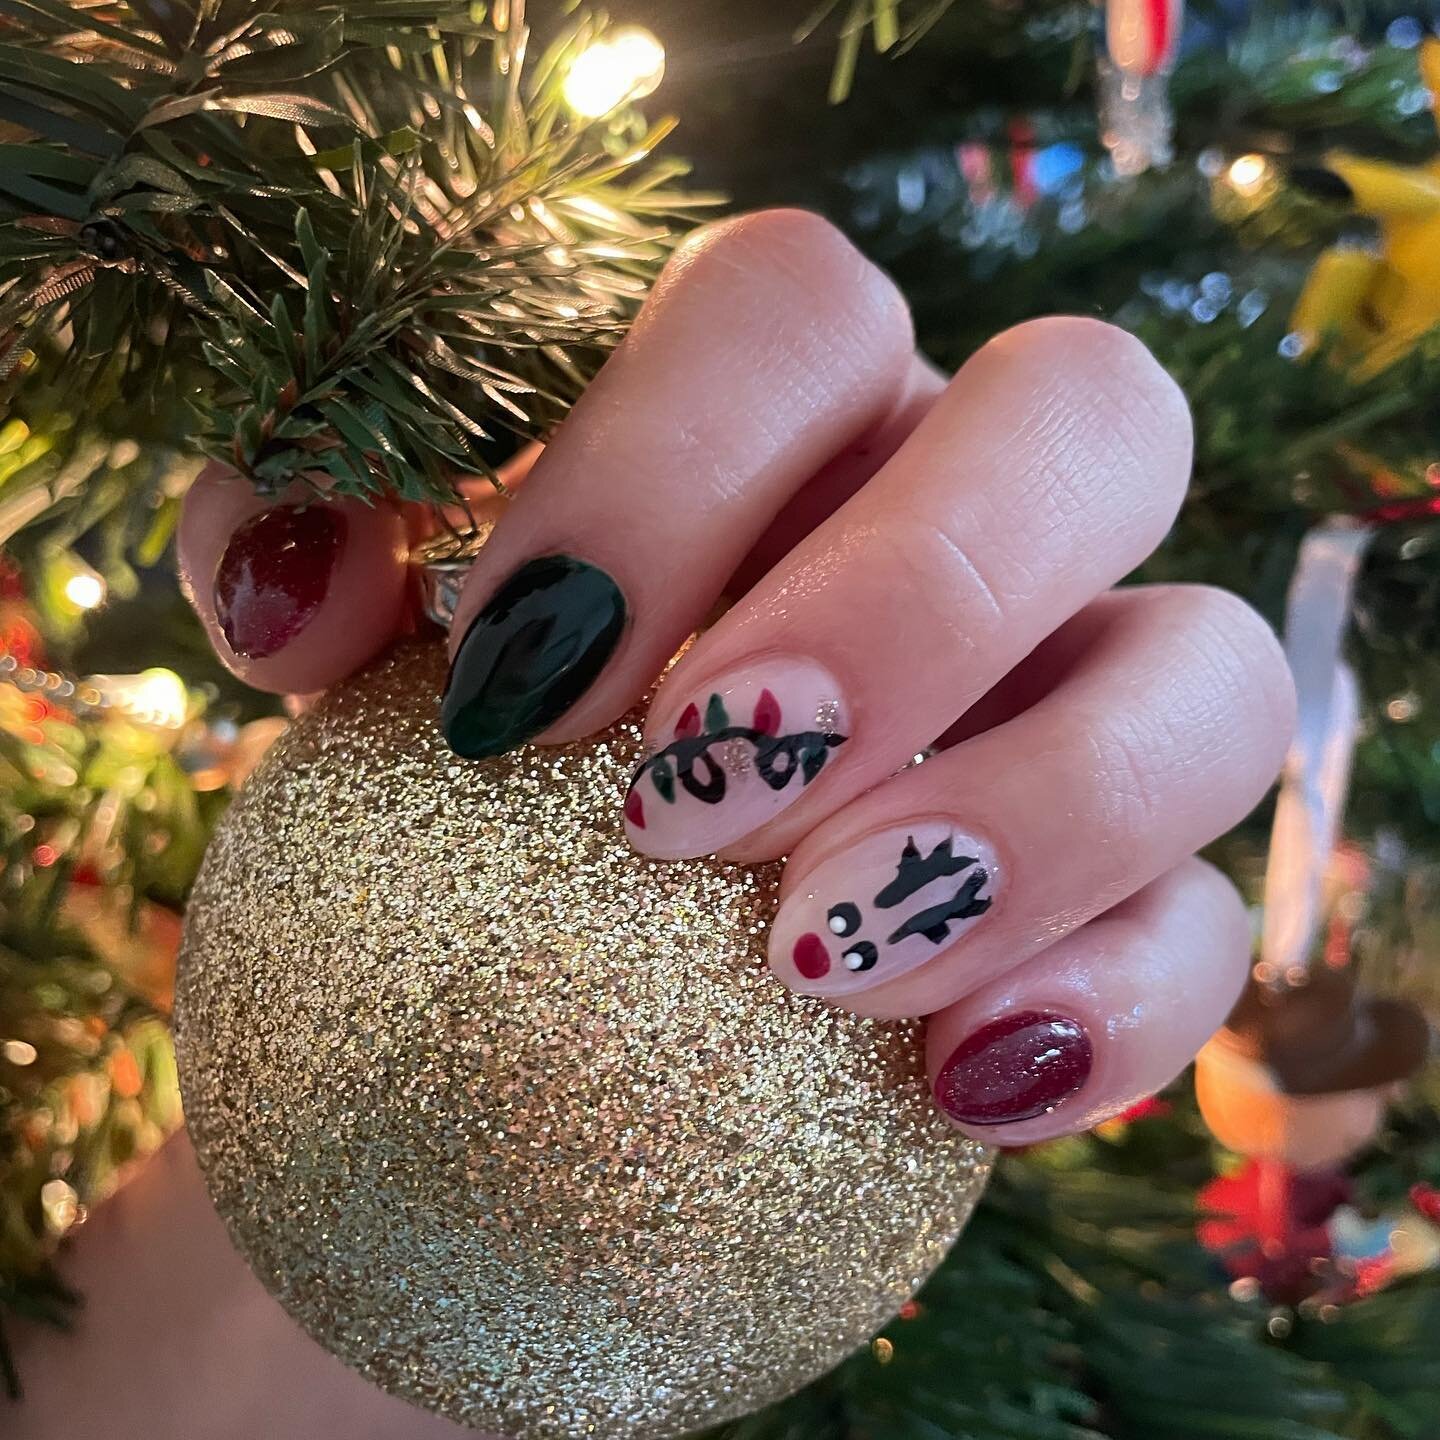 Holiday Mani by @styled_by_kristenmarie 🎄❤️
&bull;
It&rsquo;s not too late to book your holiday manicure, catch Kristen in our studio on Wednesday and Thursday of this week &amp; next!
&bull;
&bull;
#hudsonvalley #hudsonvalleyny #nailsofinstagram #n